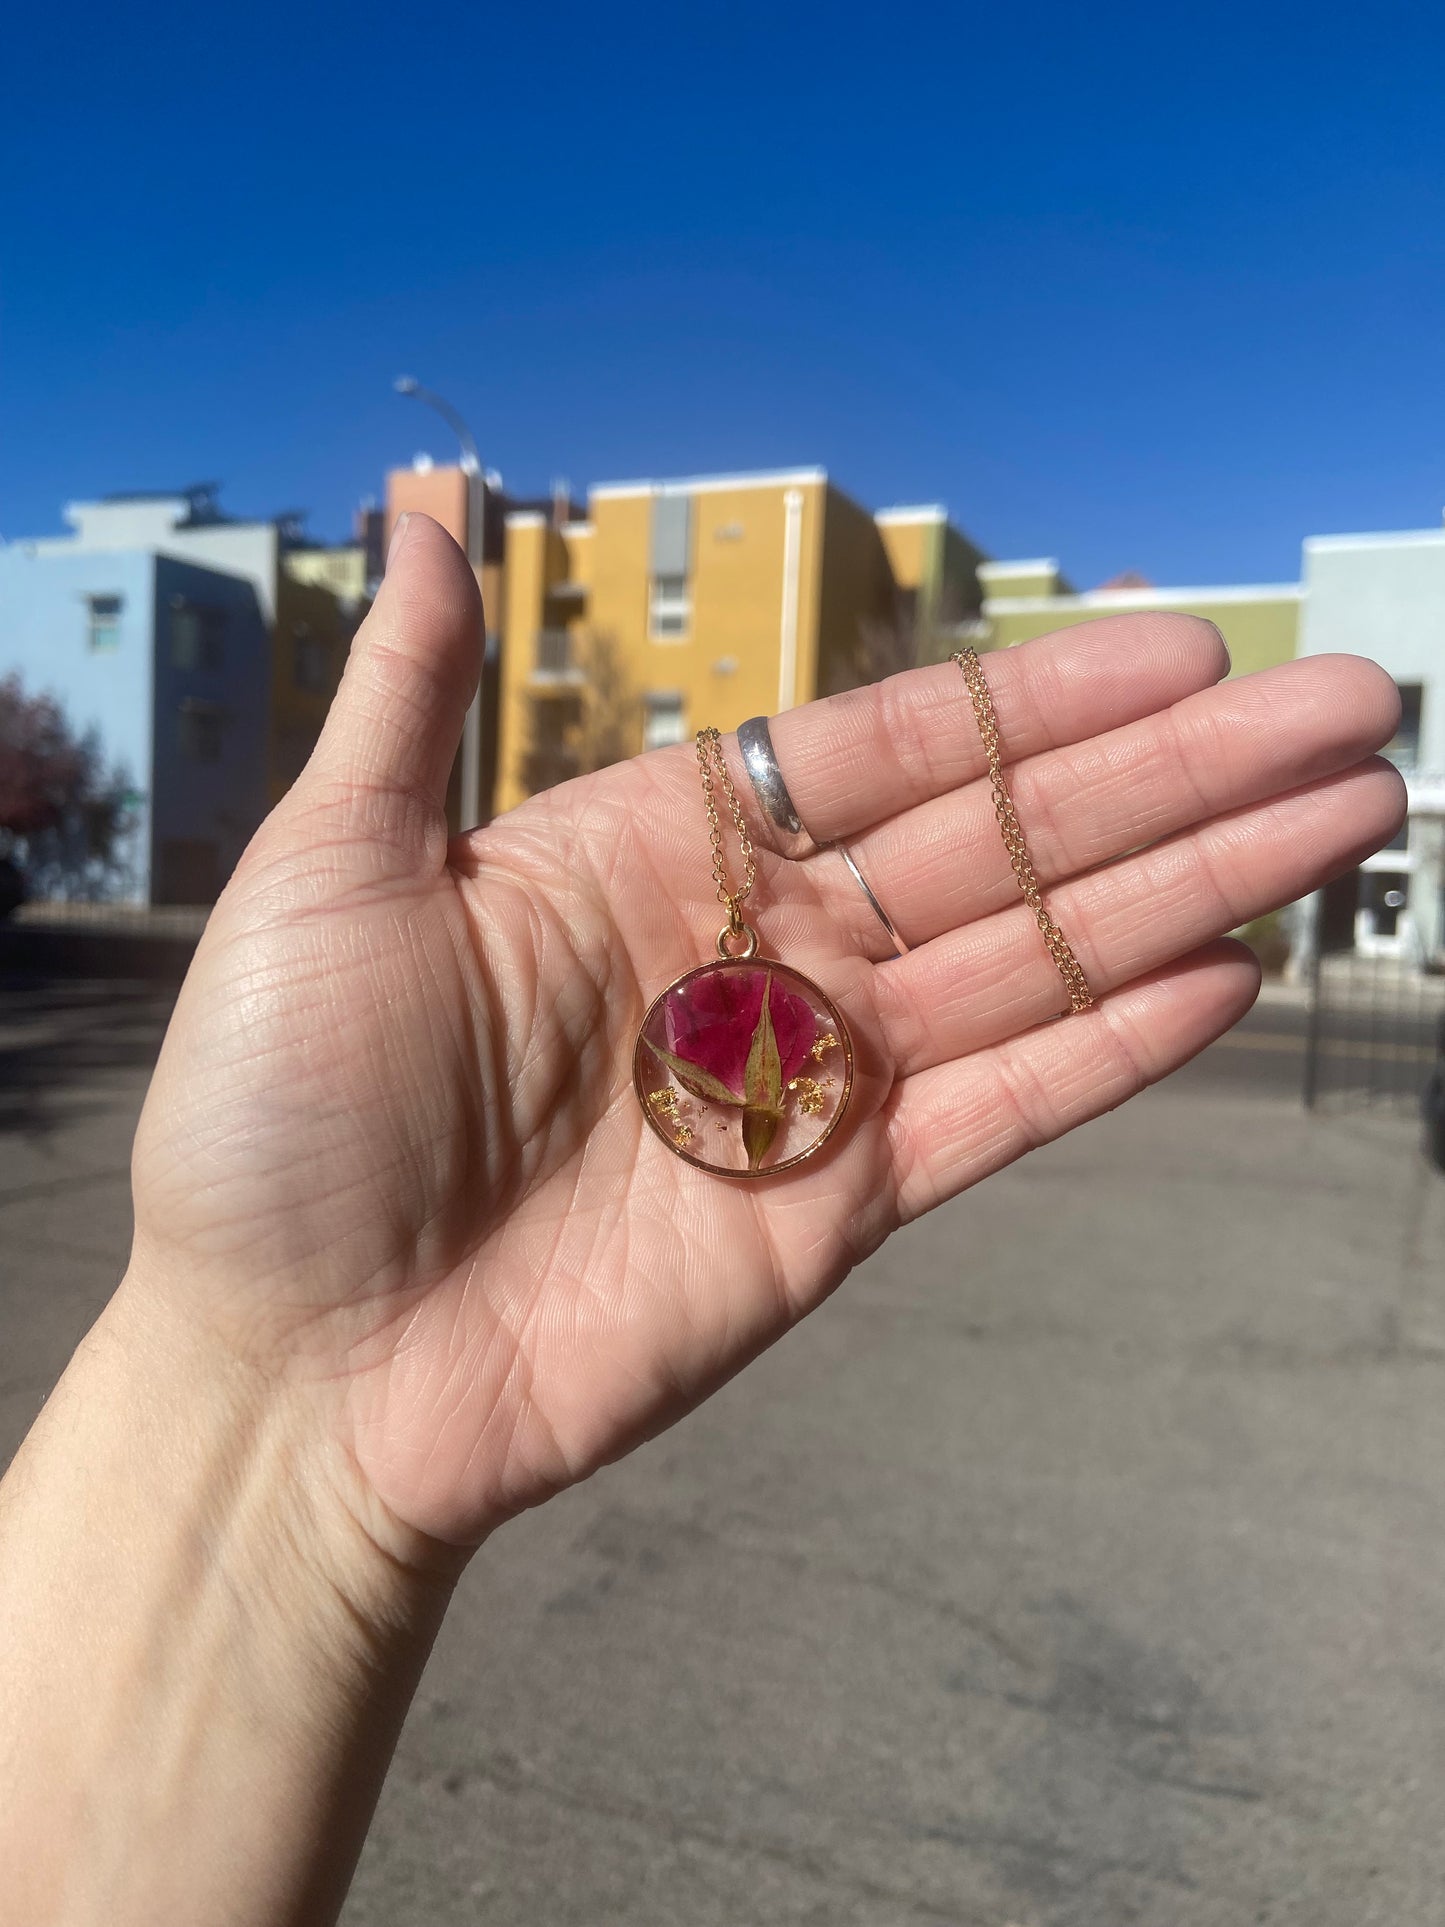 Roses - Pressed red rose bud preserved inside gold circle pendant, 16" adjustable gold-plated chain included